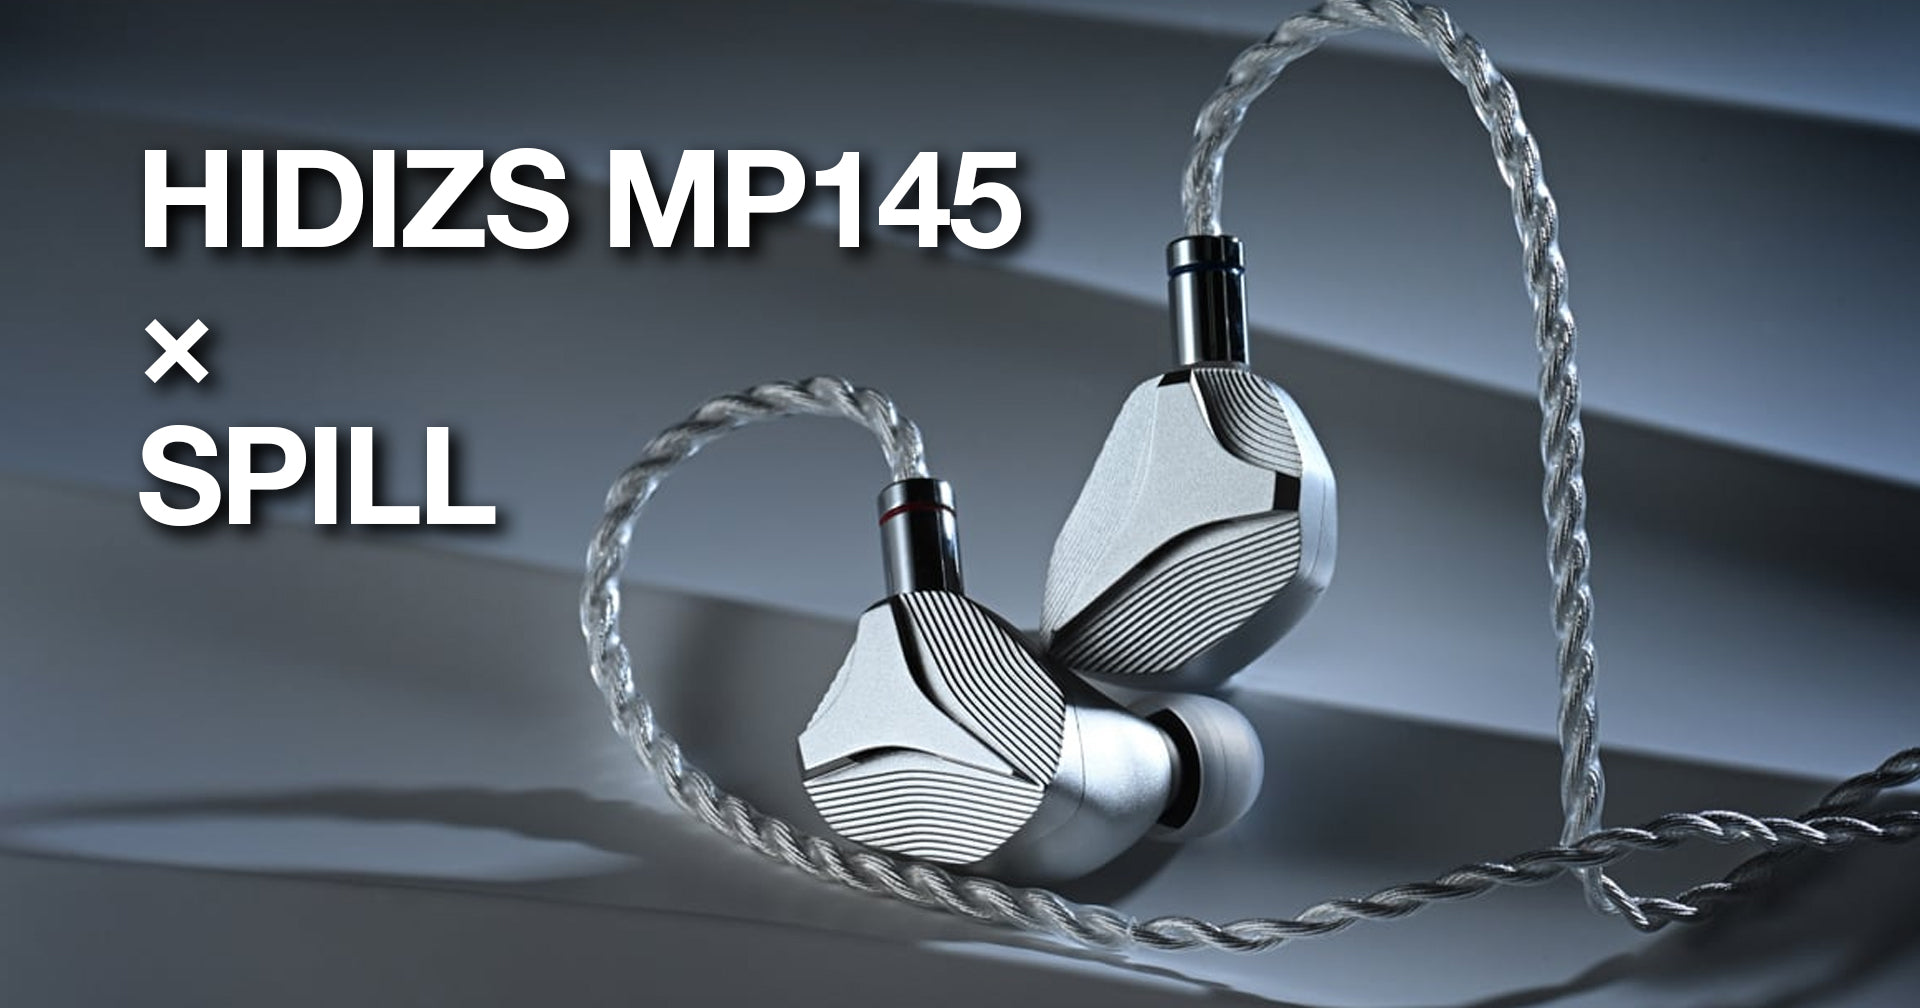 HIDIZS MP145 Review - SPILL